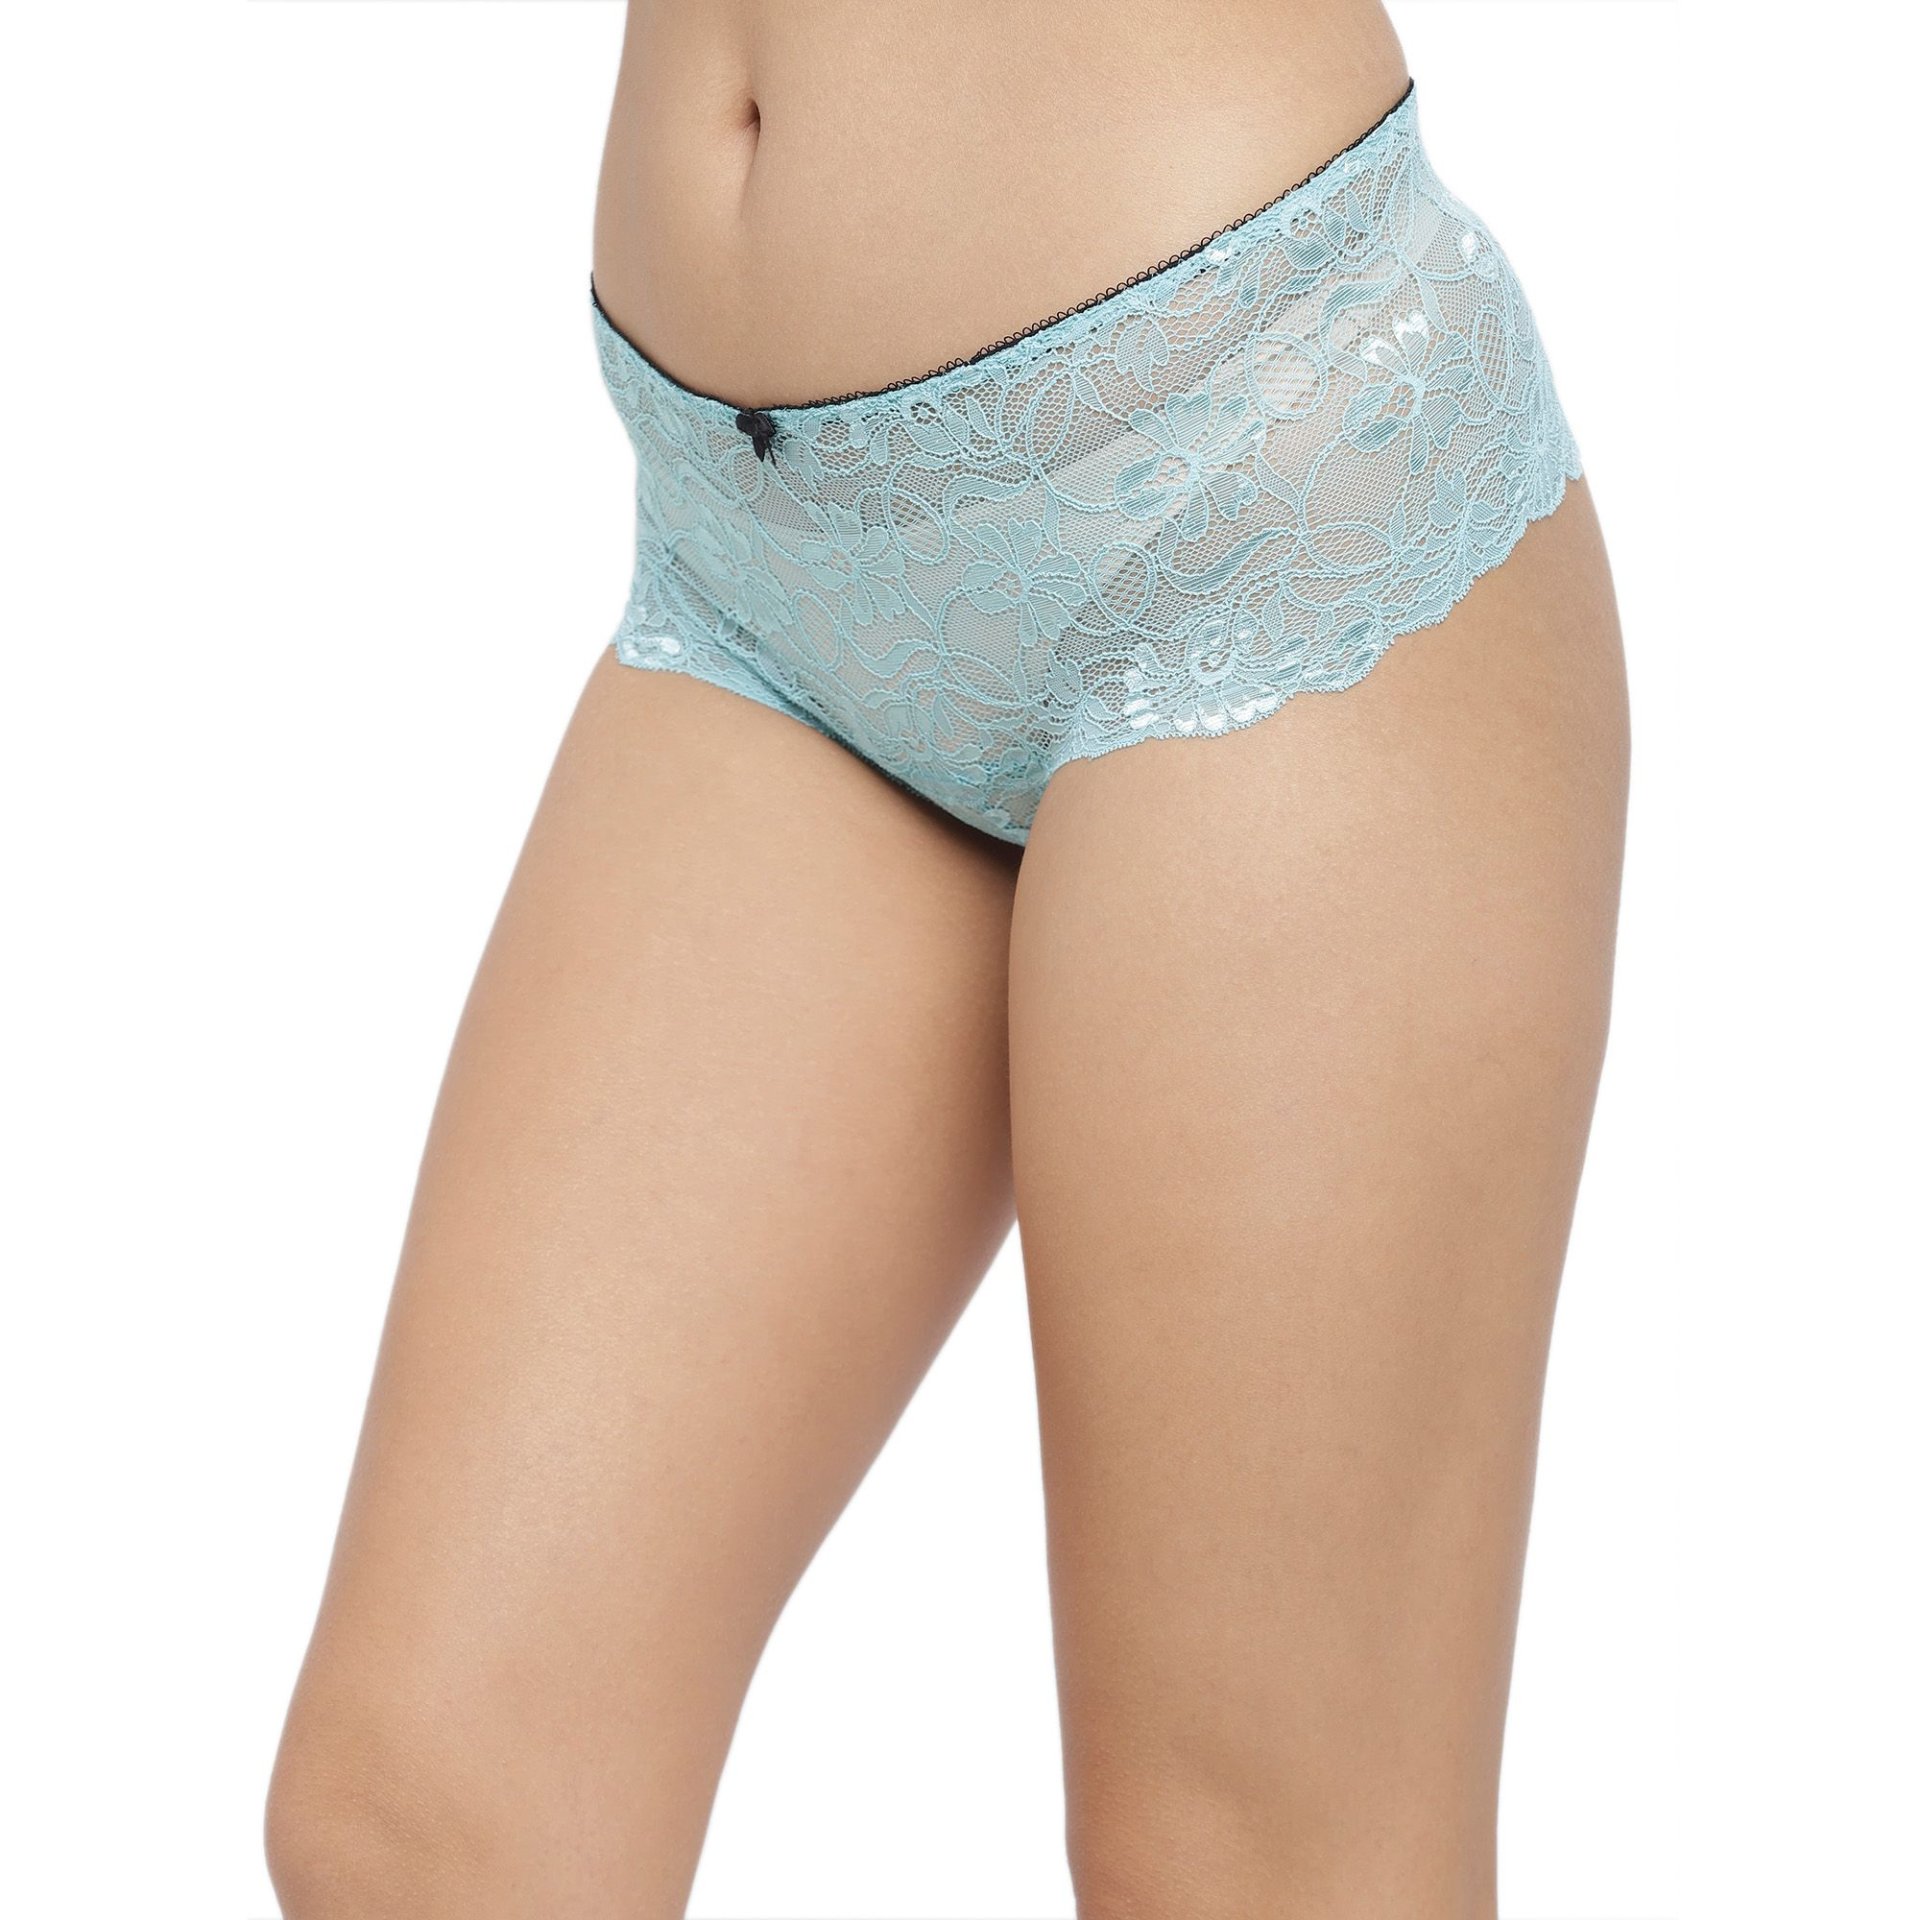 N-Gal Women's Erotic Lace See Through Mid Waist Underwear Lingerie Knickers  Brief Panty_Blue - Online Shopping Website